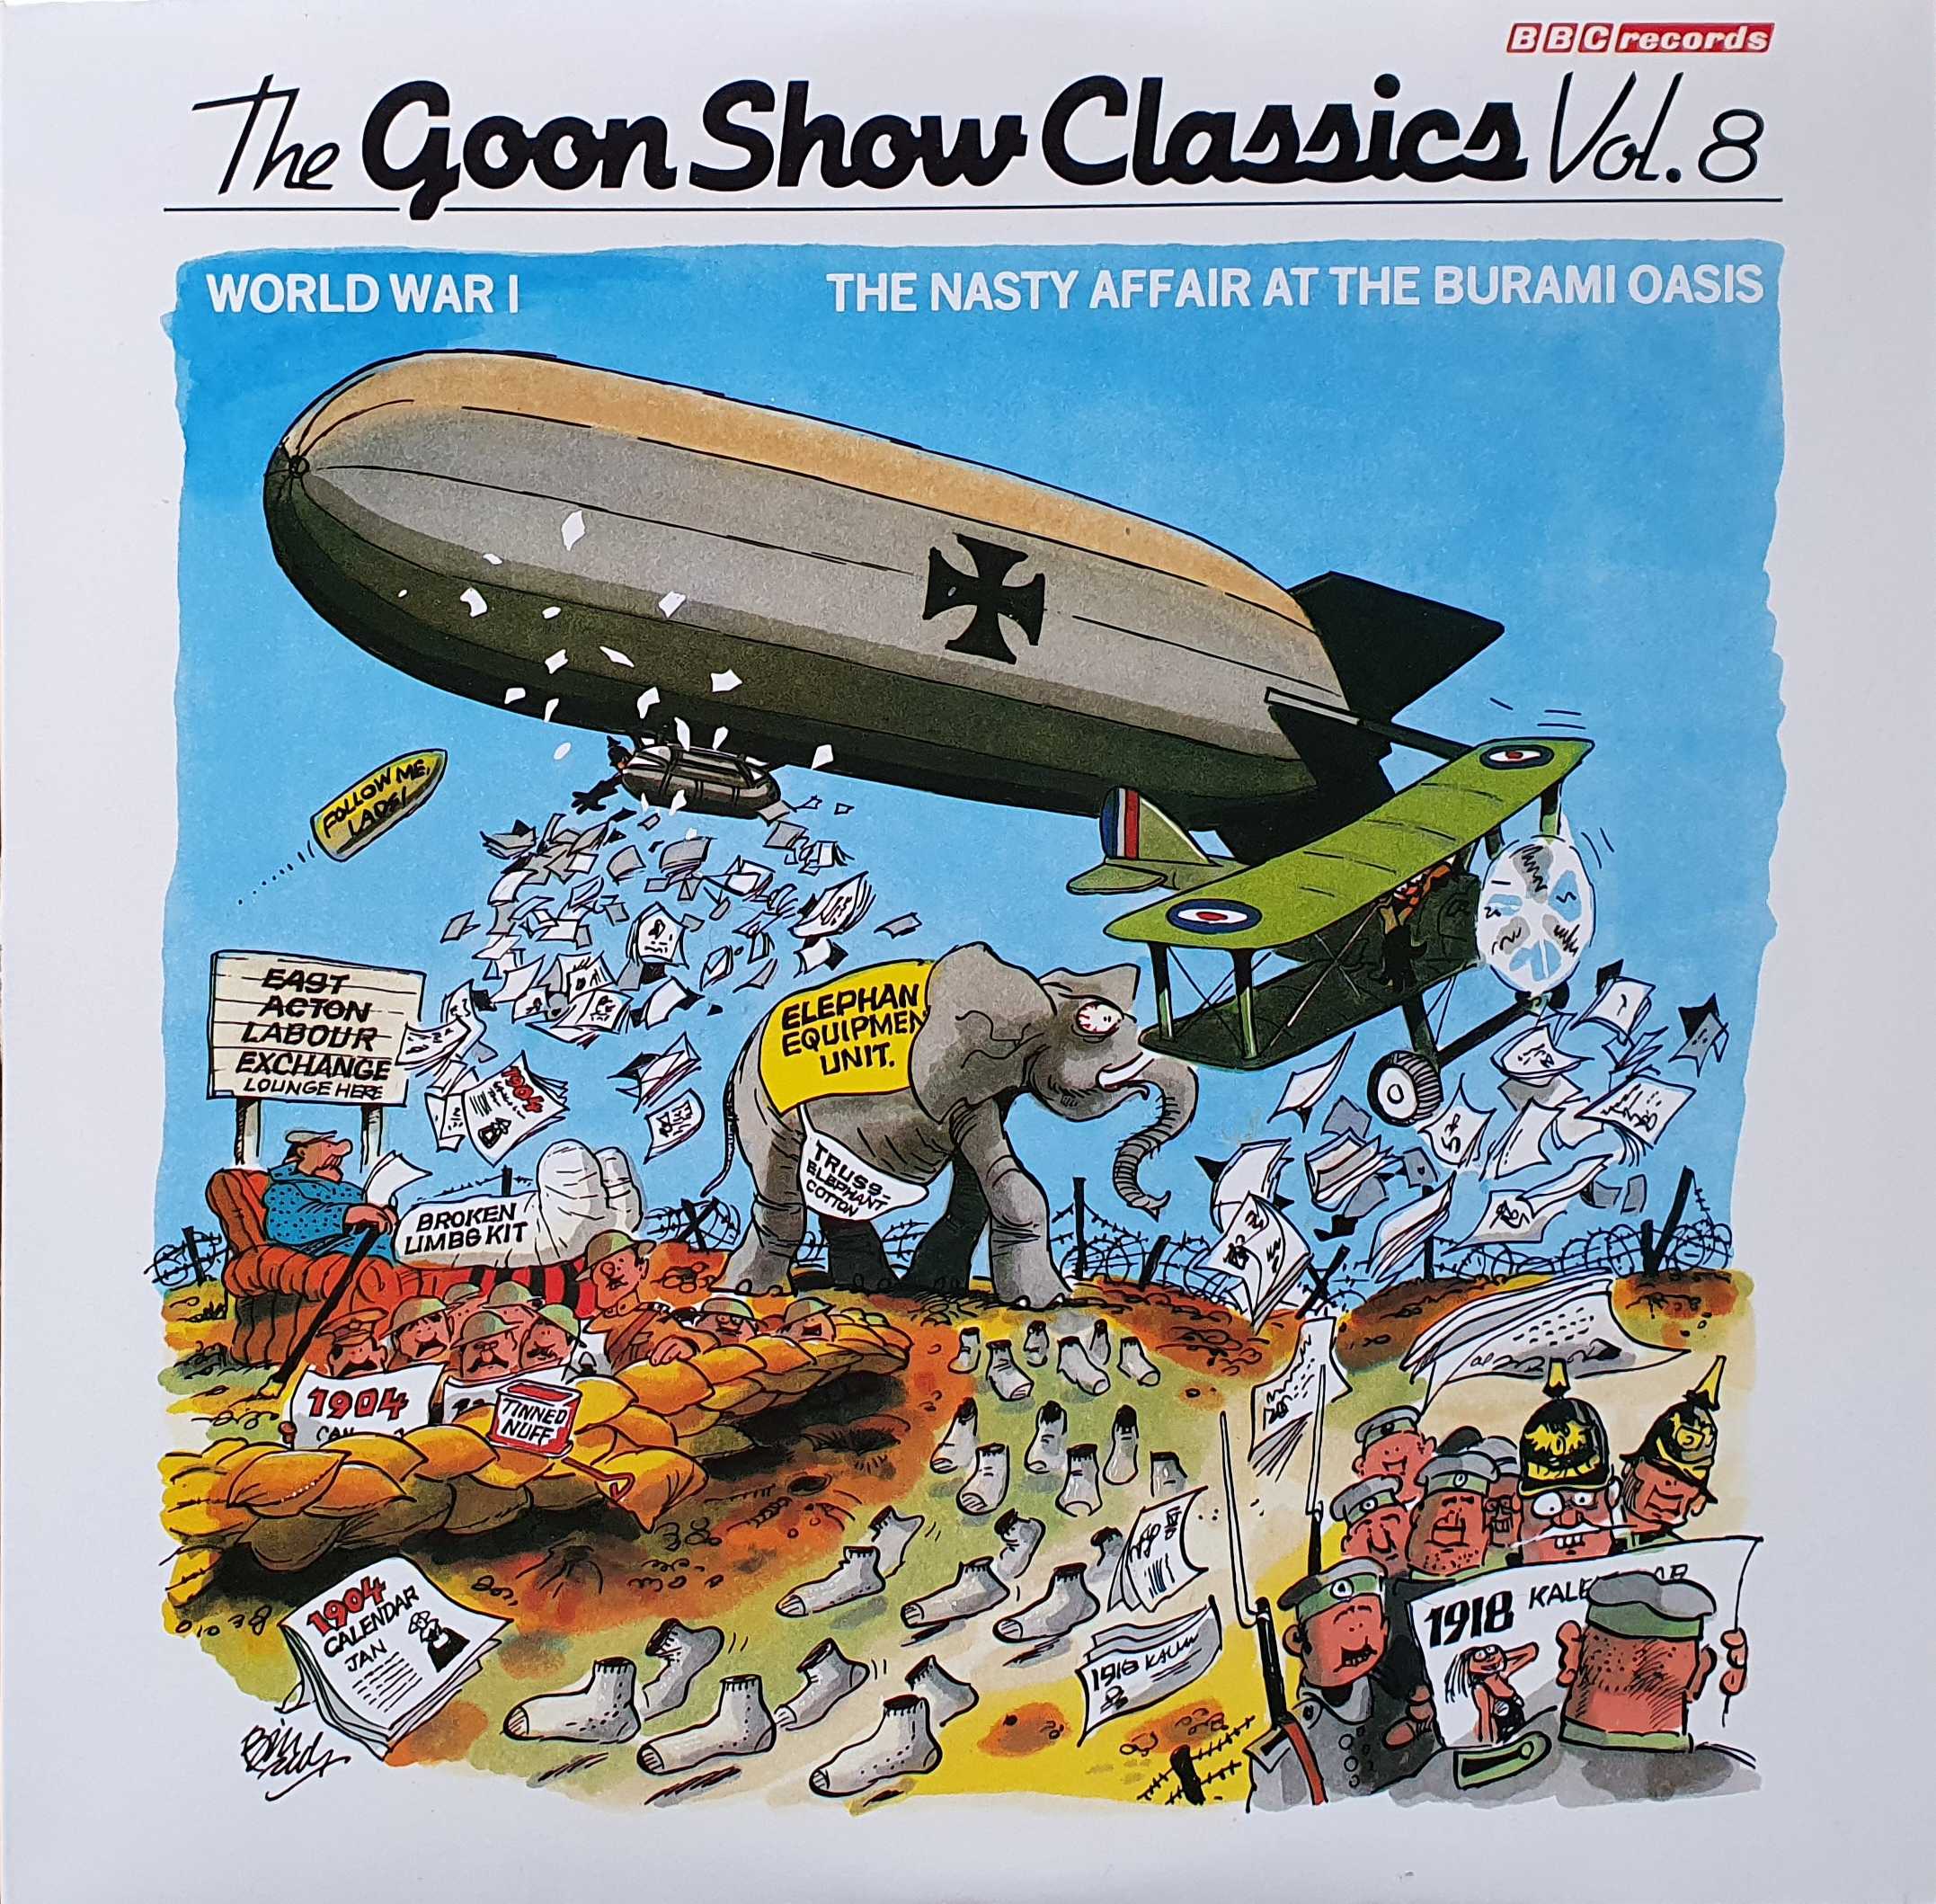 Picture of 2964 067 Goon Show classics vol. 8 by artist The Goon Show from the BBC albums - Records and Tapes library